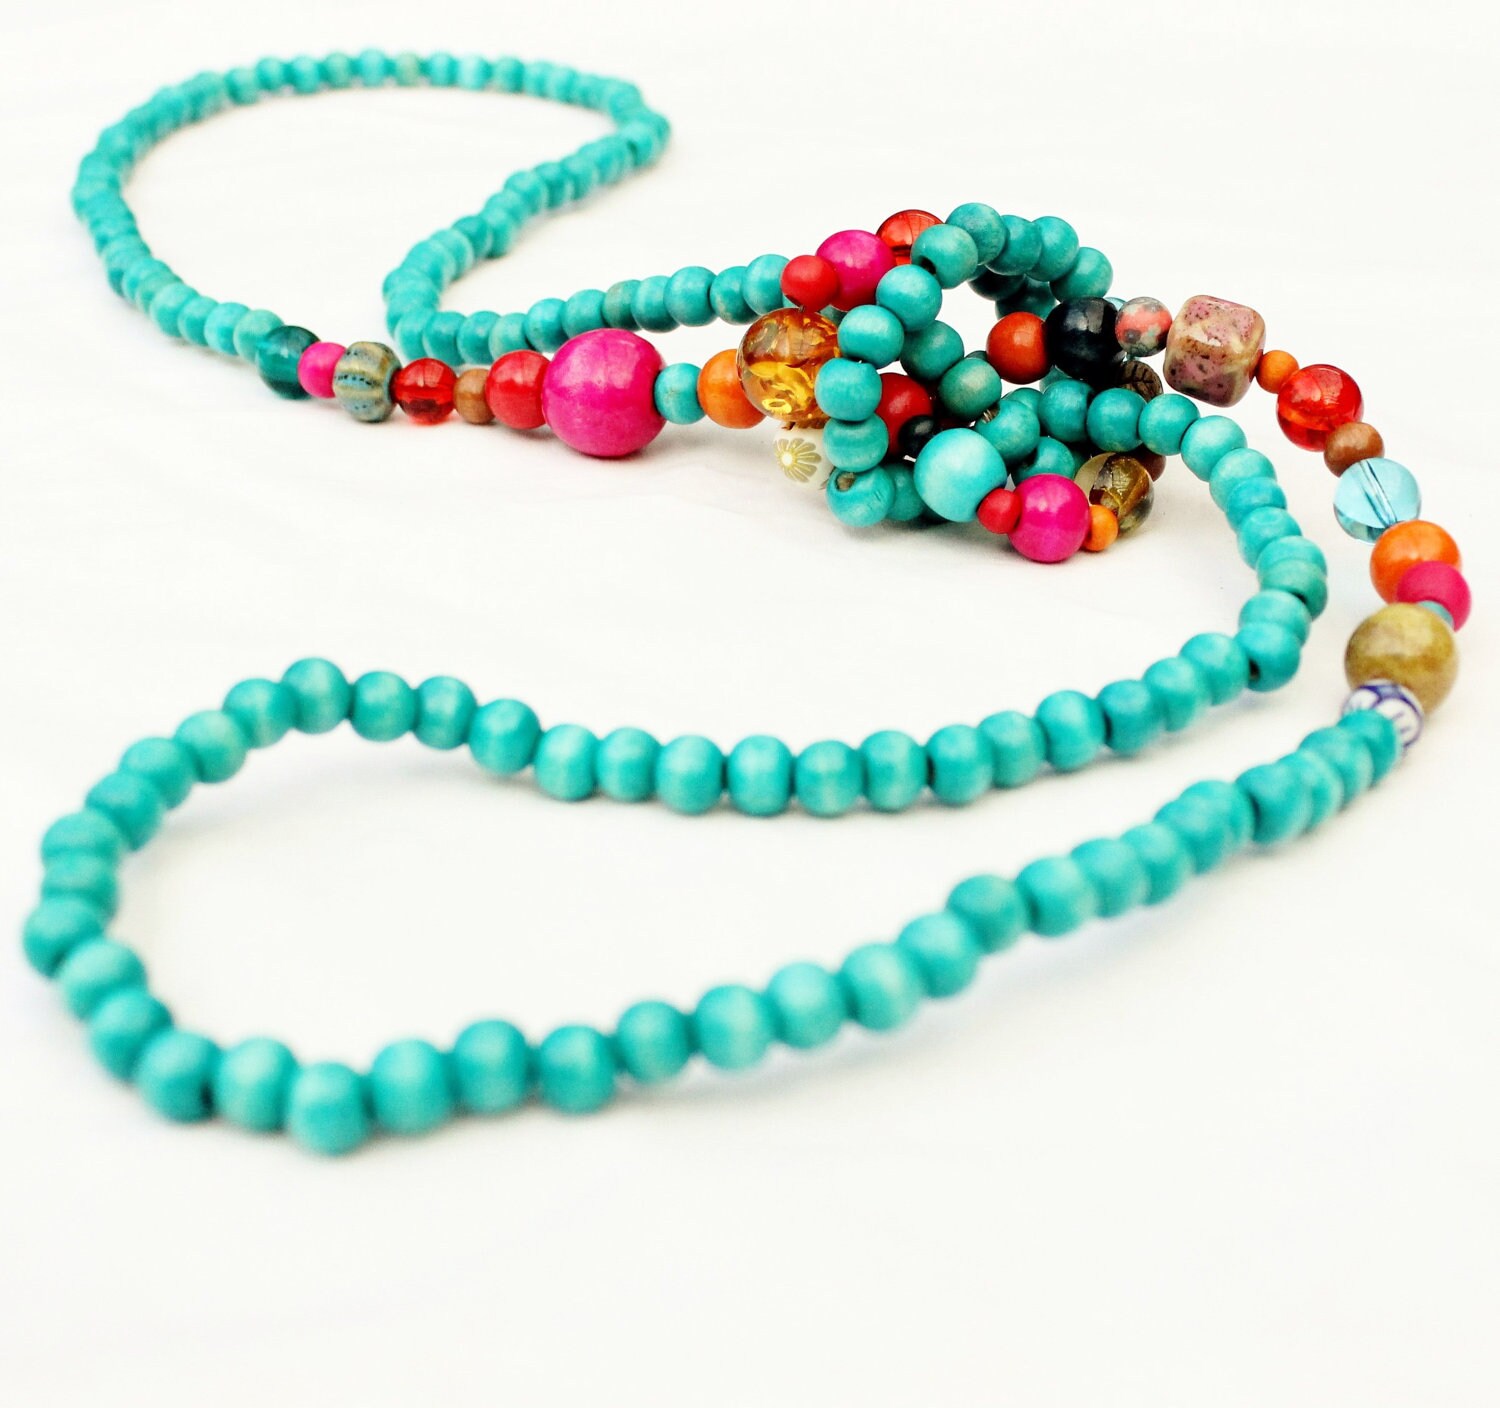 Long wooden bead necklace turquoise rope knot necklace hot